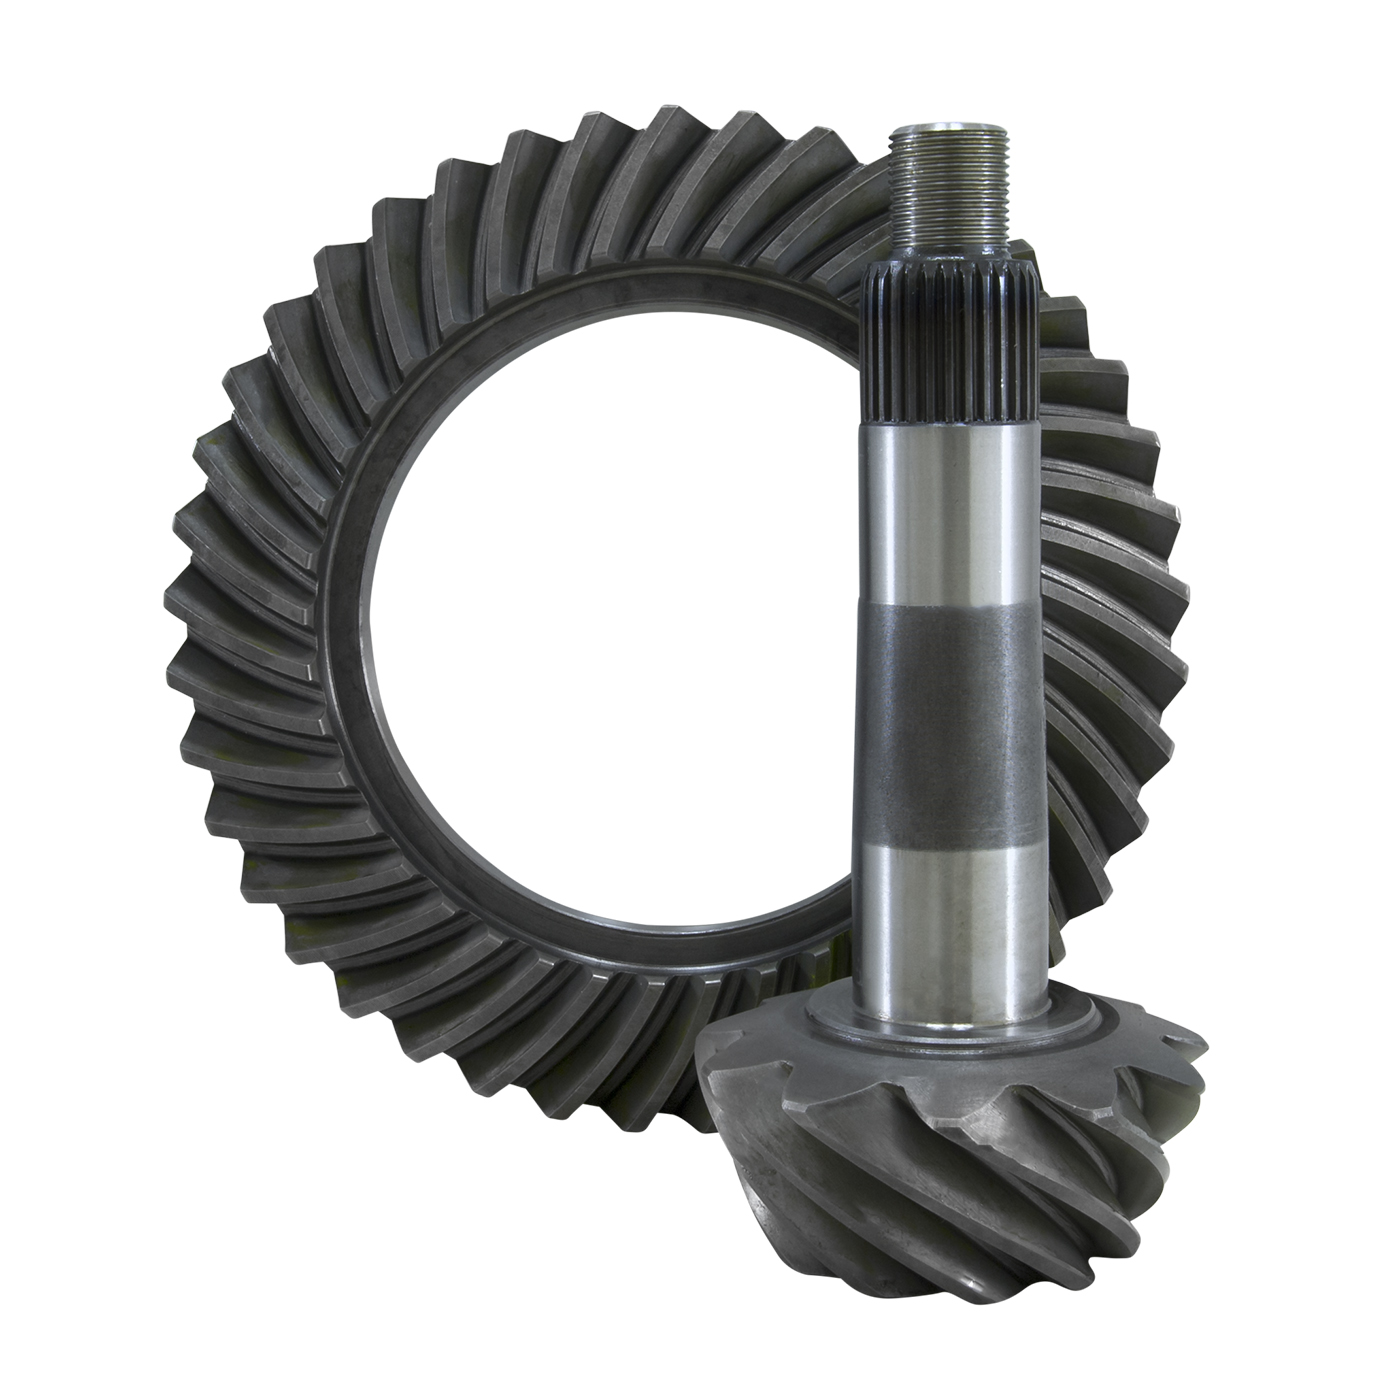 USA Standard 36180 Ring & Pinion in.Thick in. Gear Set, For GM 12 Bolt Truck, 4.56 Ratio